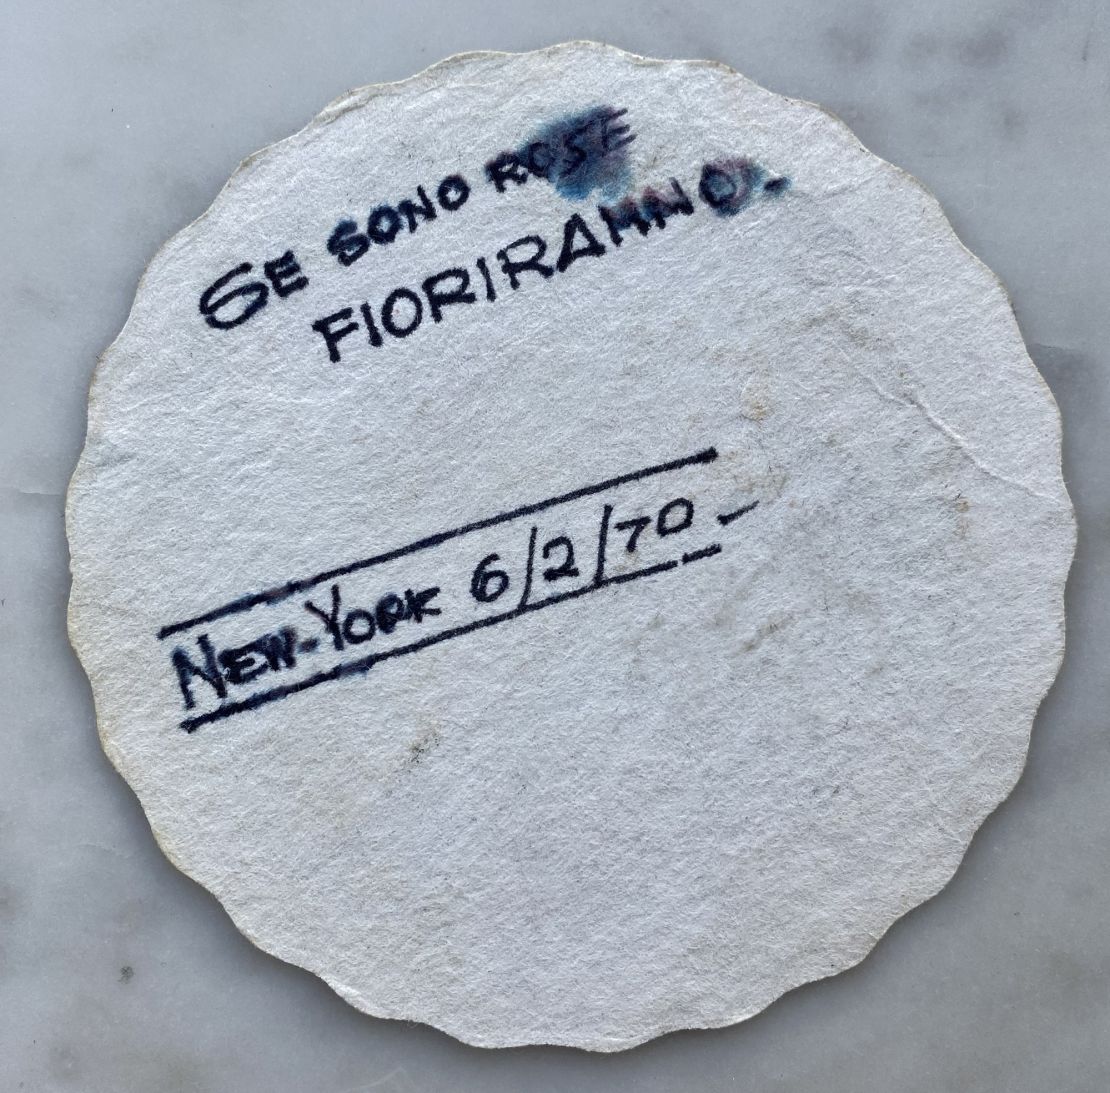 Stefano wrote this Italian phrase on a beer mat in a New York City bar after meeting Sally.